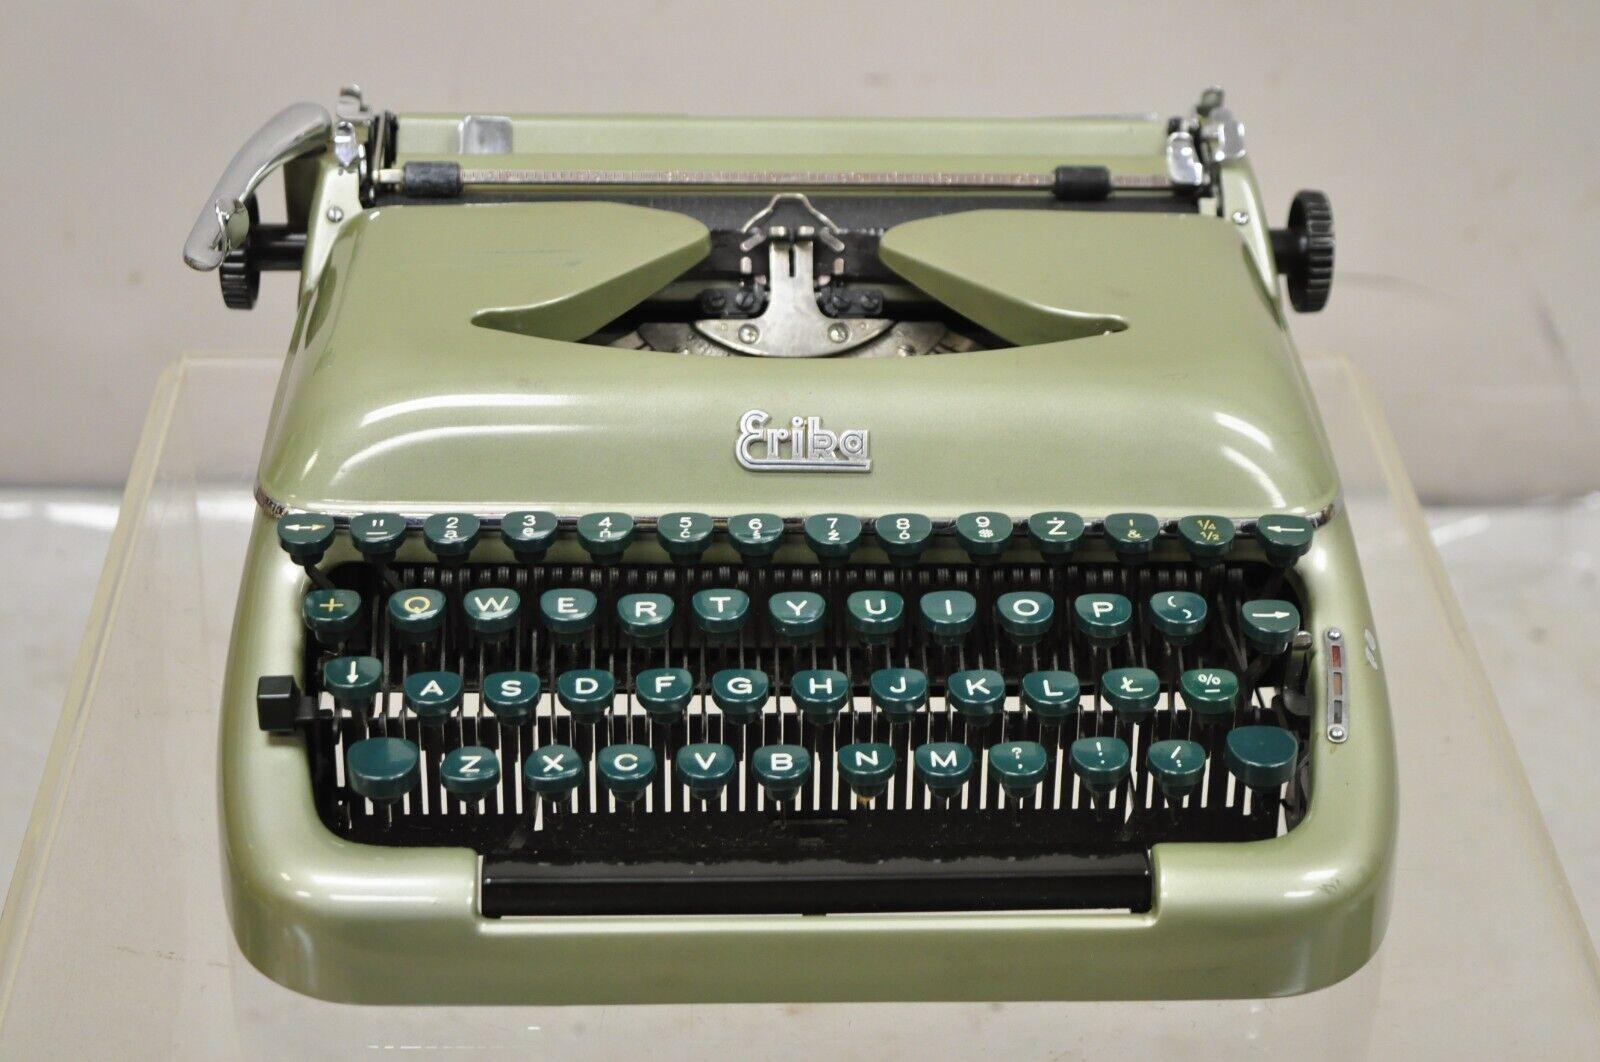 Vintage Erika Model 10 Germany Pearl Green Manual Portable Typewriter in Case. Circa Early 20th Century. Measurements: 6.5